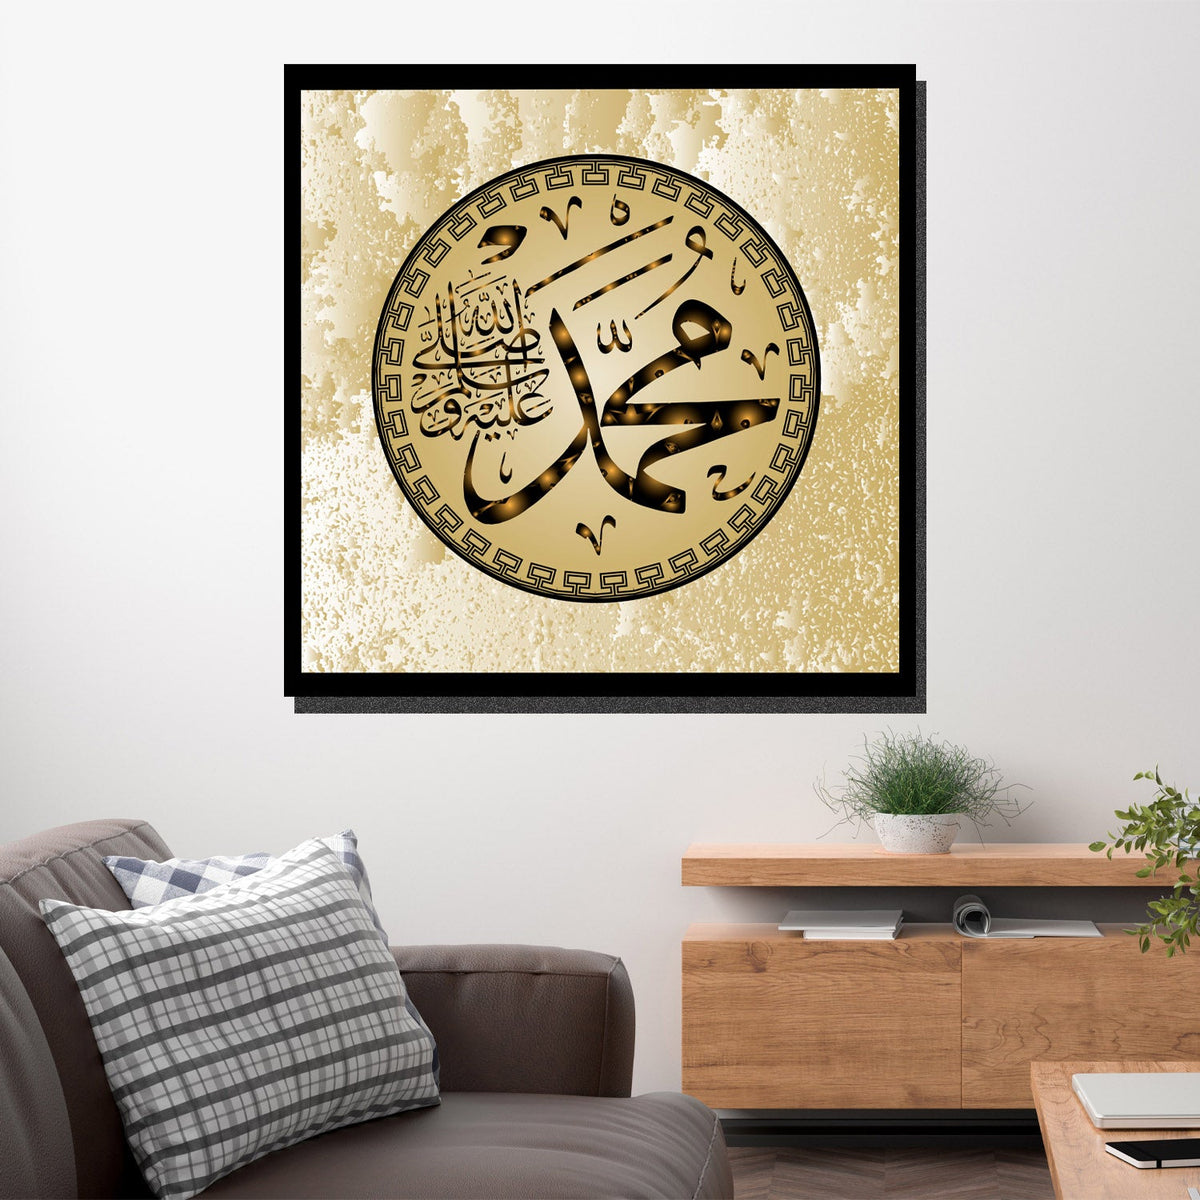 https://cdn.shopify.com/s/files/1/0387/9986/8044/products/IslamicArtLimitedEdition7CanvasArtprintStretched-1.jpg